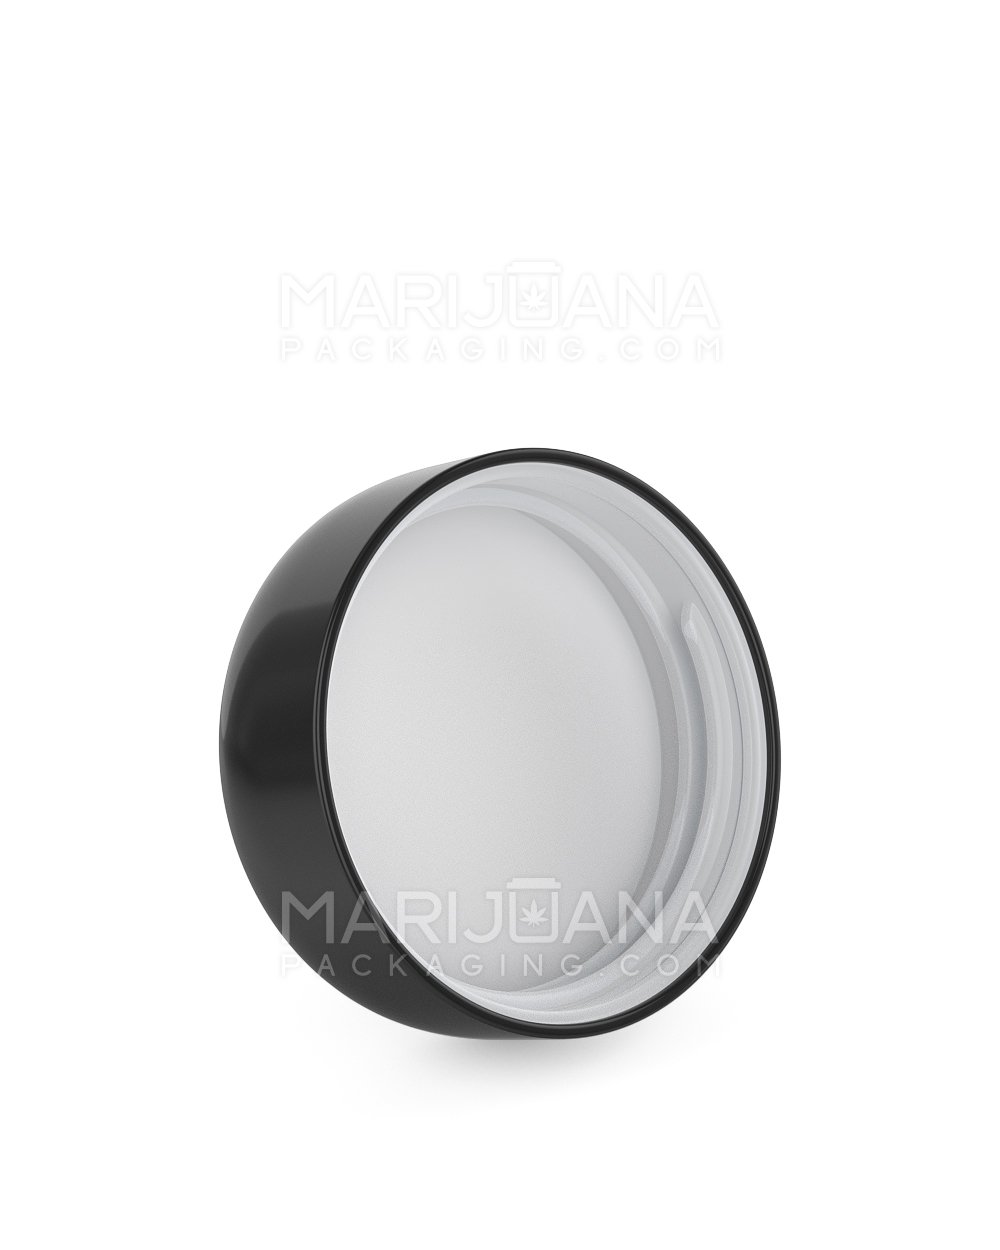 Child Resistant | Dome Push Down & Turn Plastic Caps w/ Foam Liner | 53mm - Glossy Black - 120 Count - 2